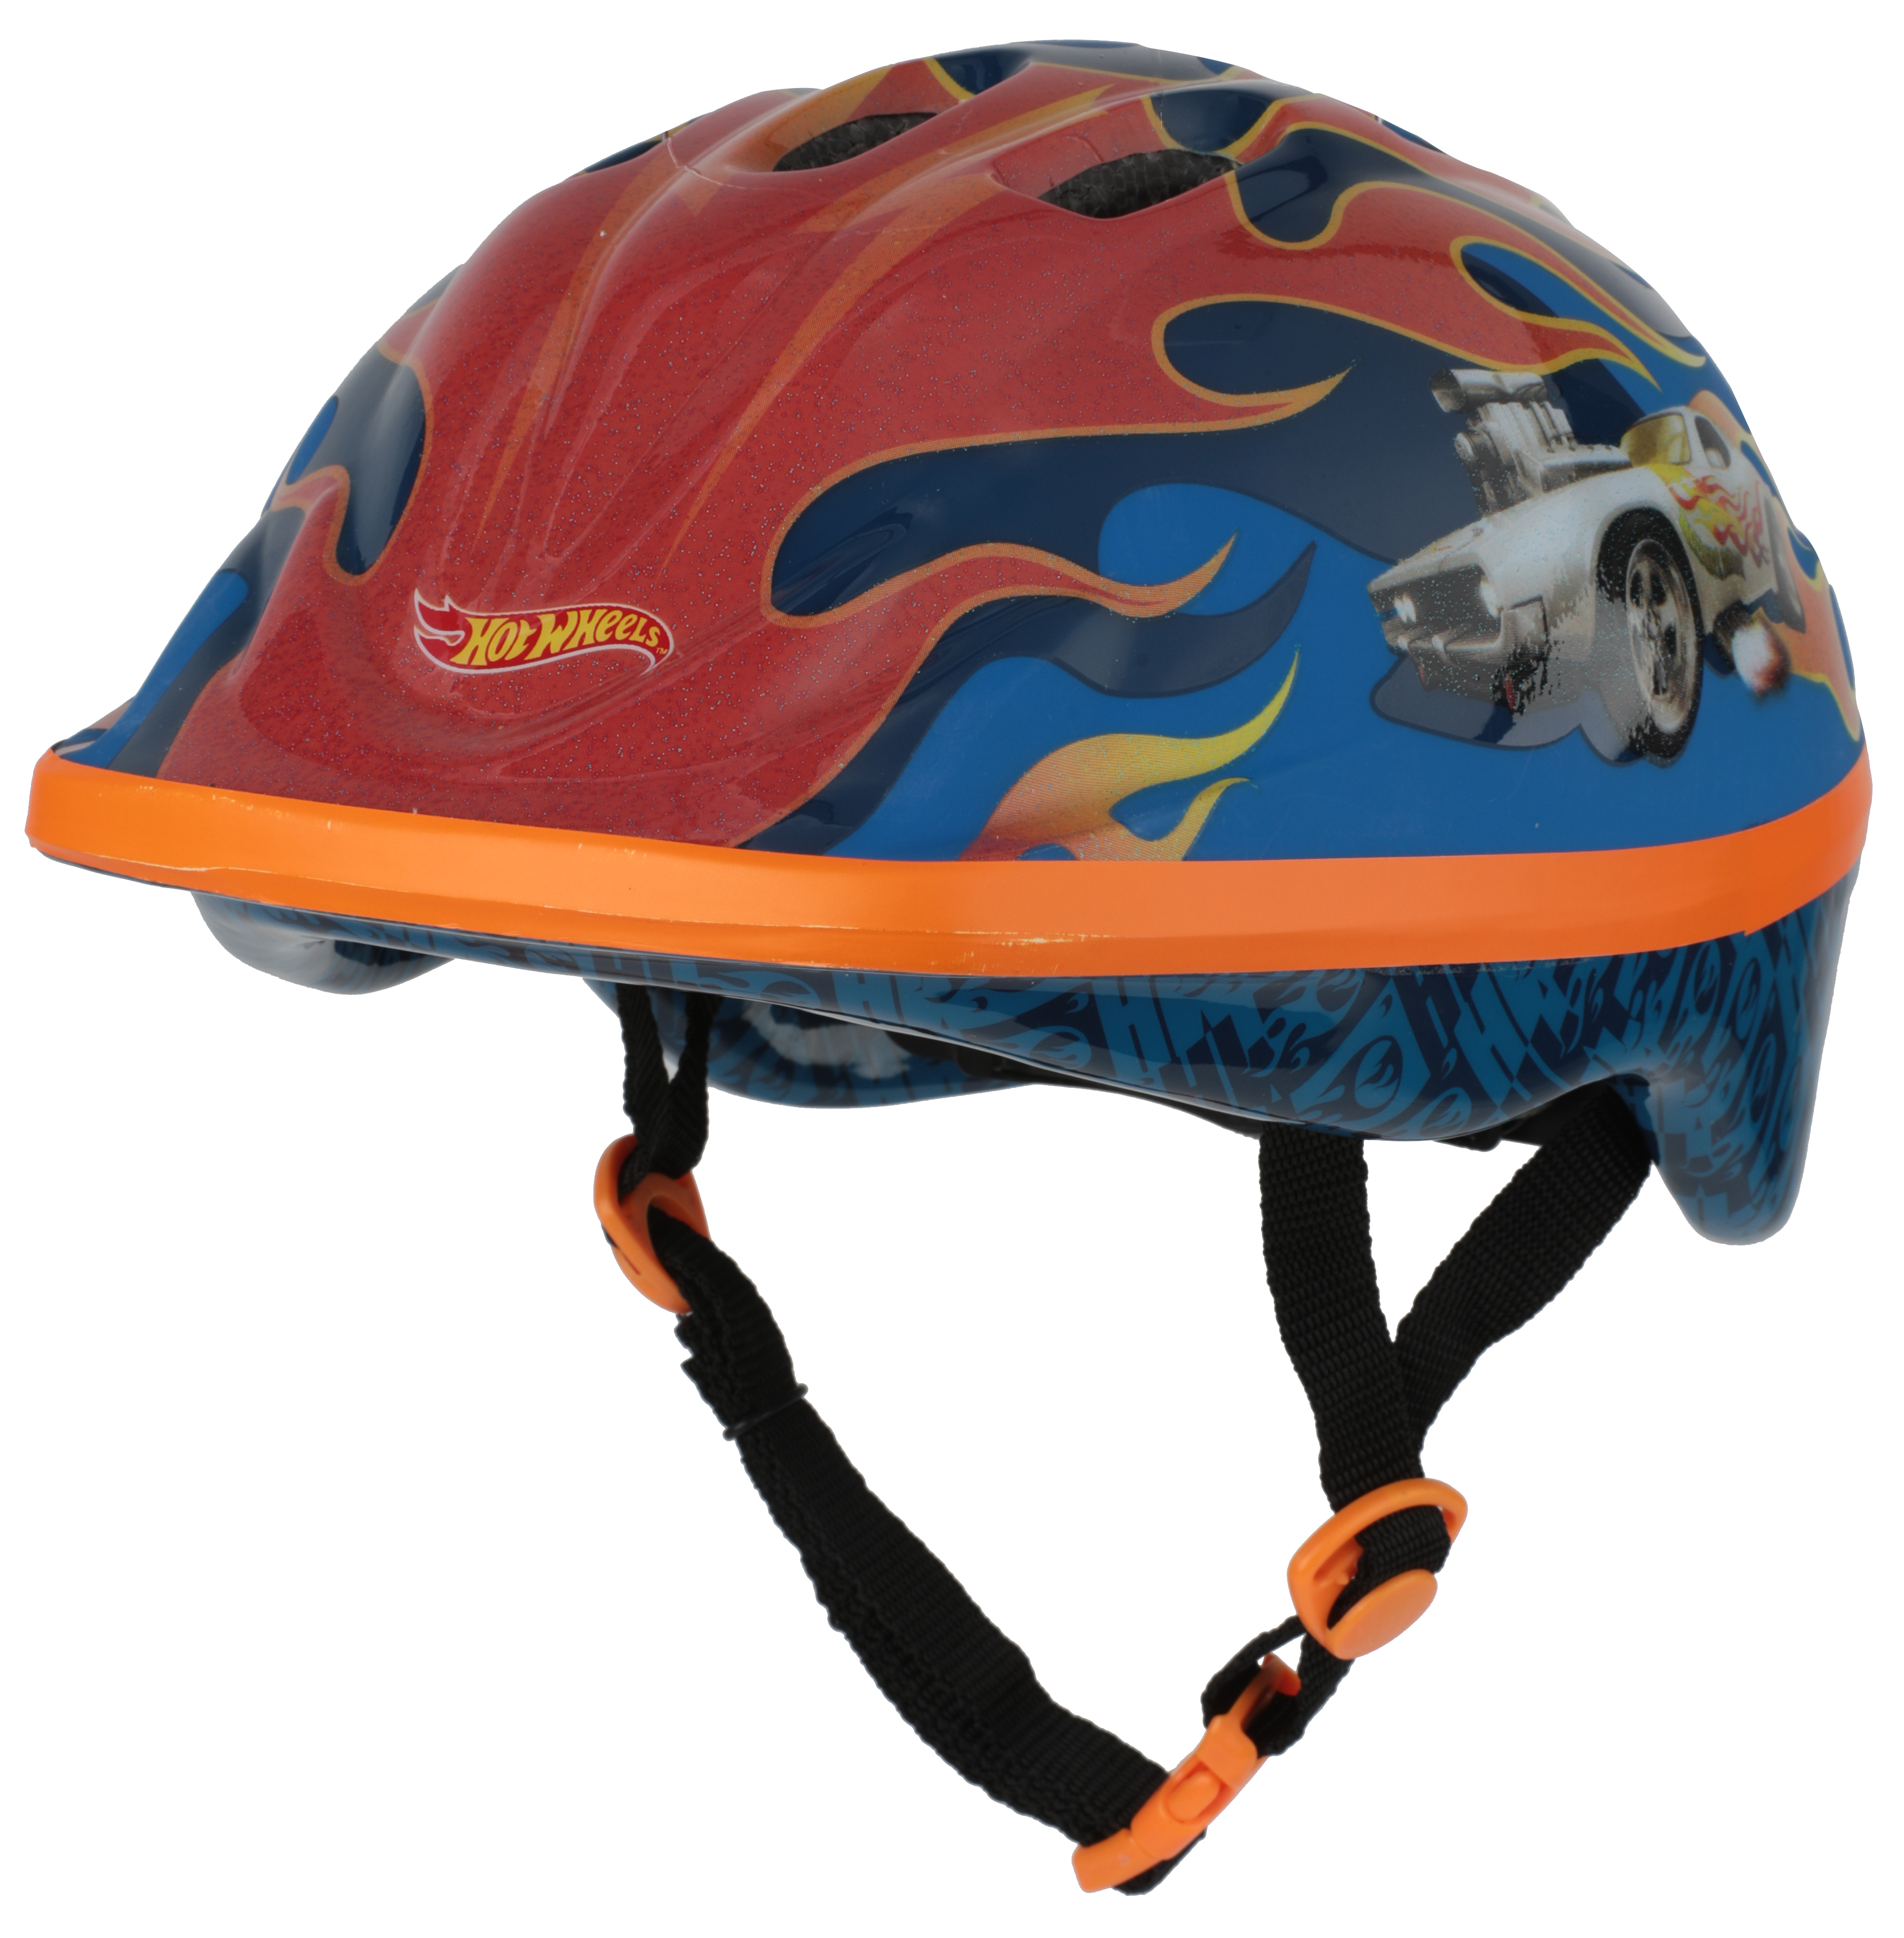 Hot Wheels Helmet with Surprise Bonus Car for Bikes, Skateboards and Scooters, Ages 5+ - image 5 of 10